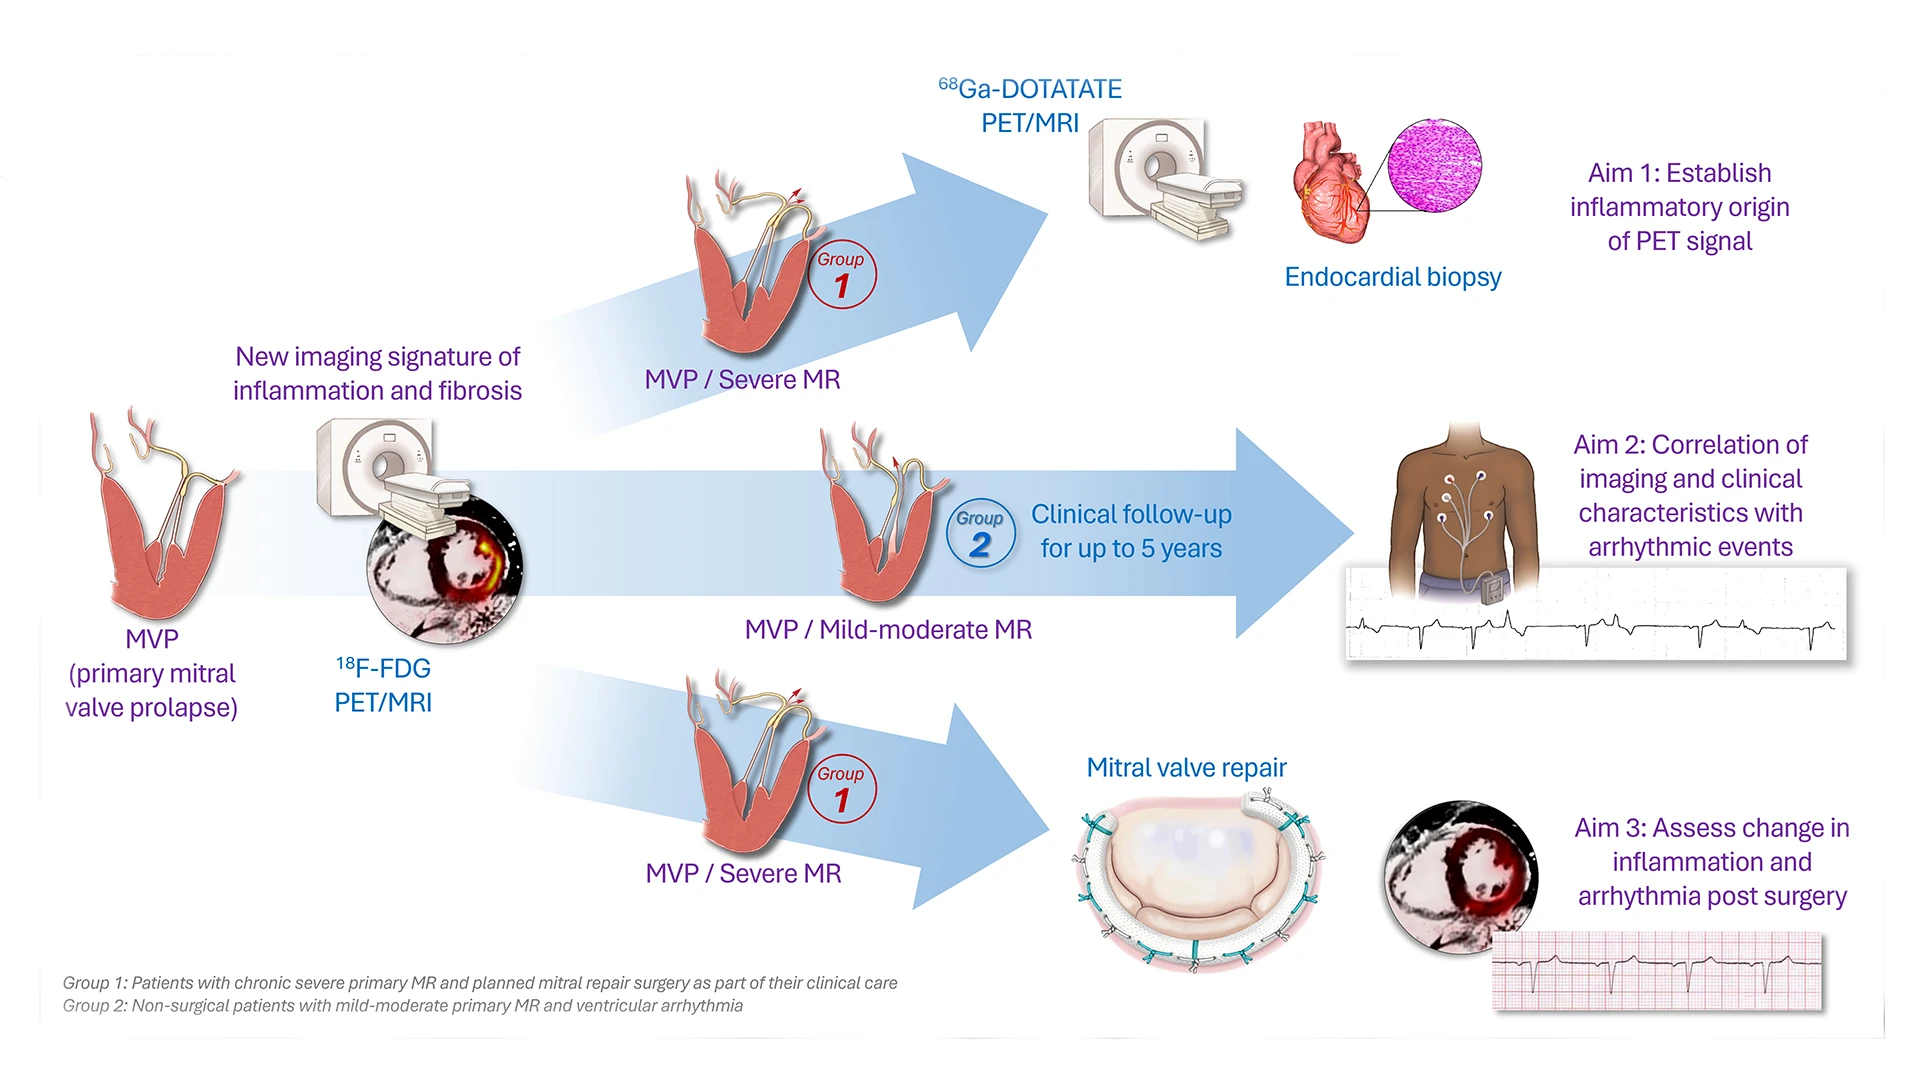 An abstract of the mitral valve prolapse research grant proposal.